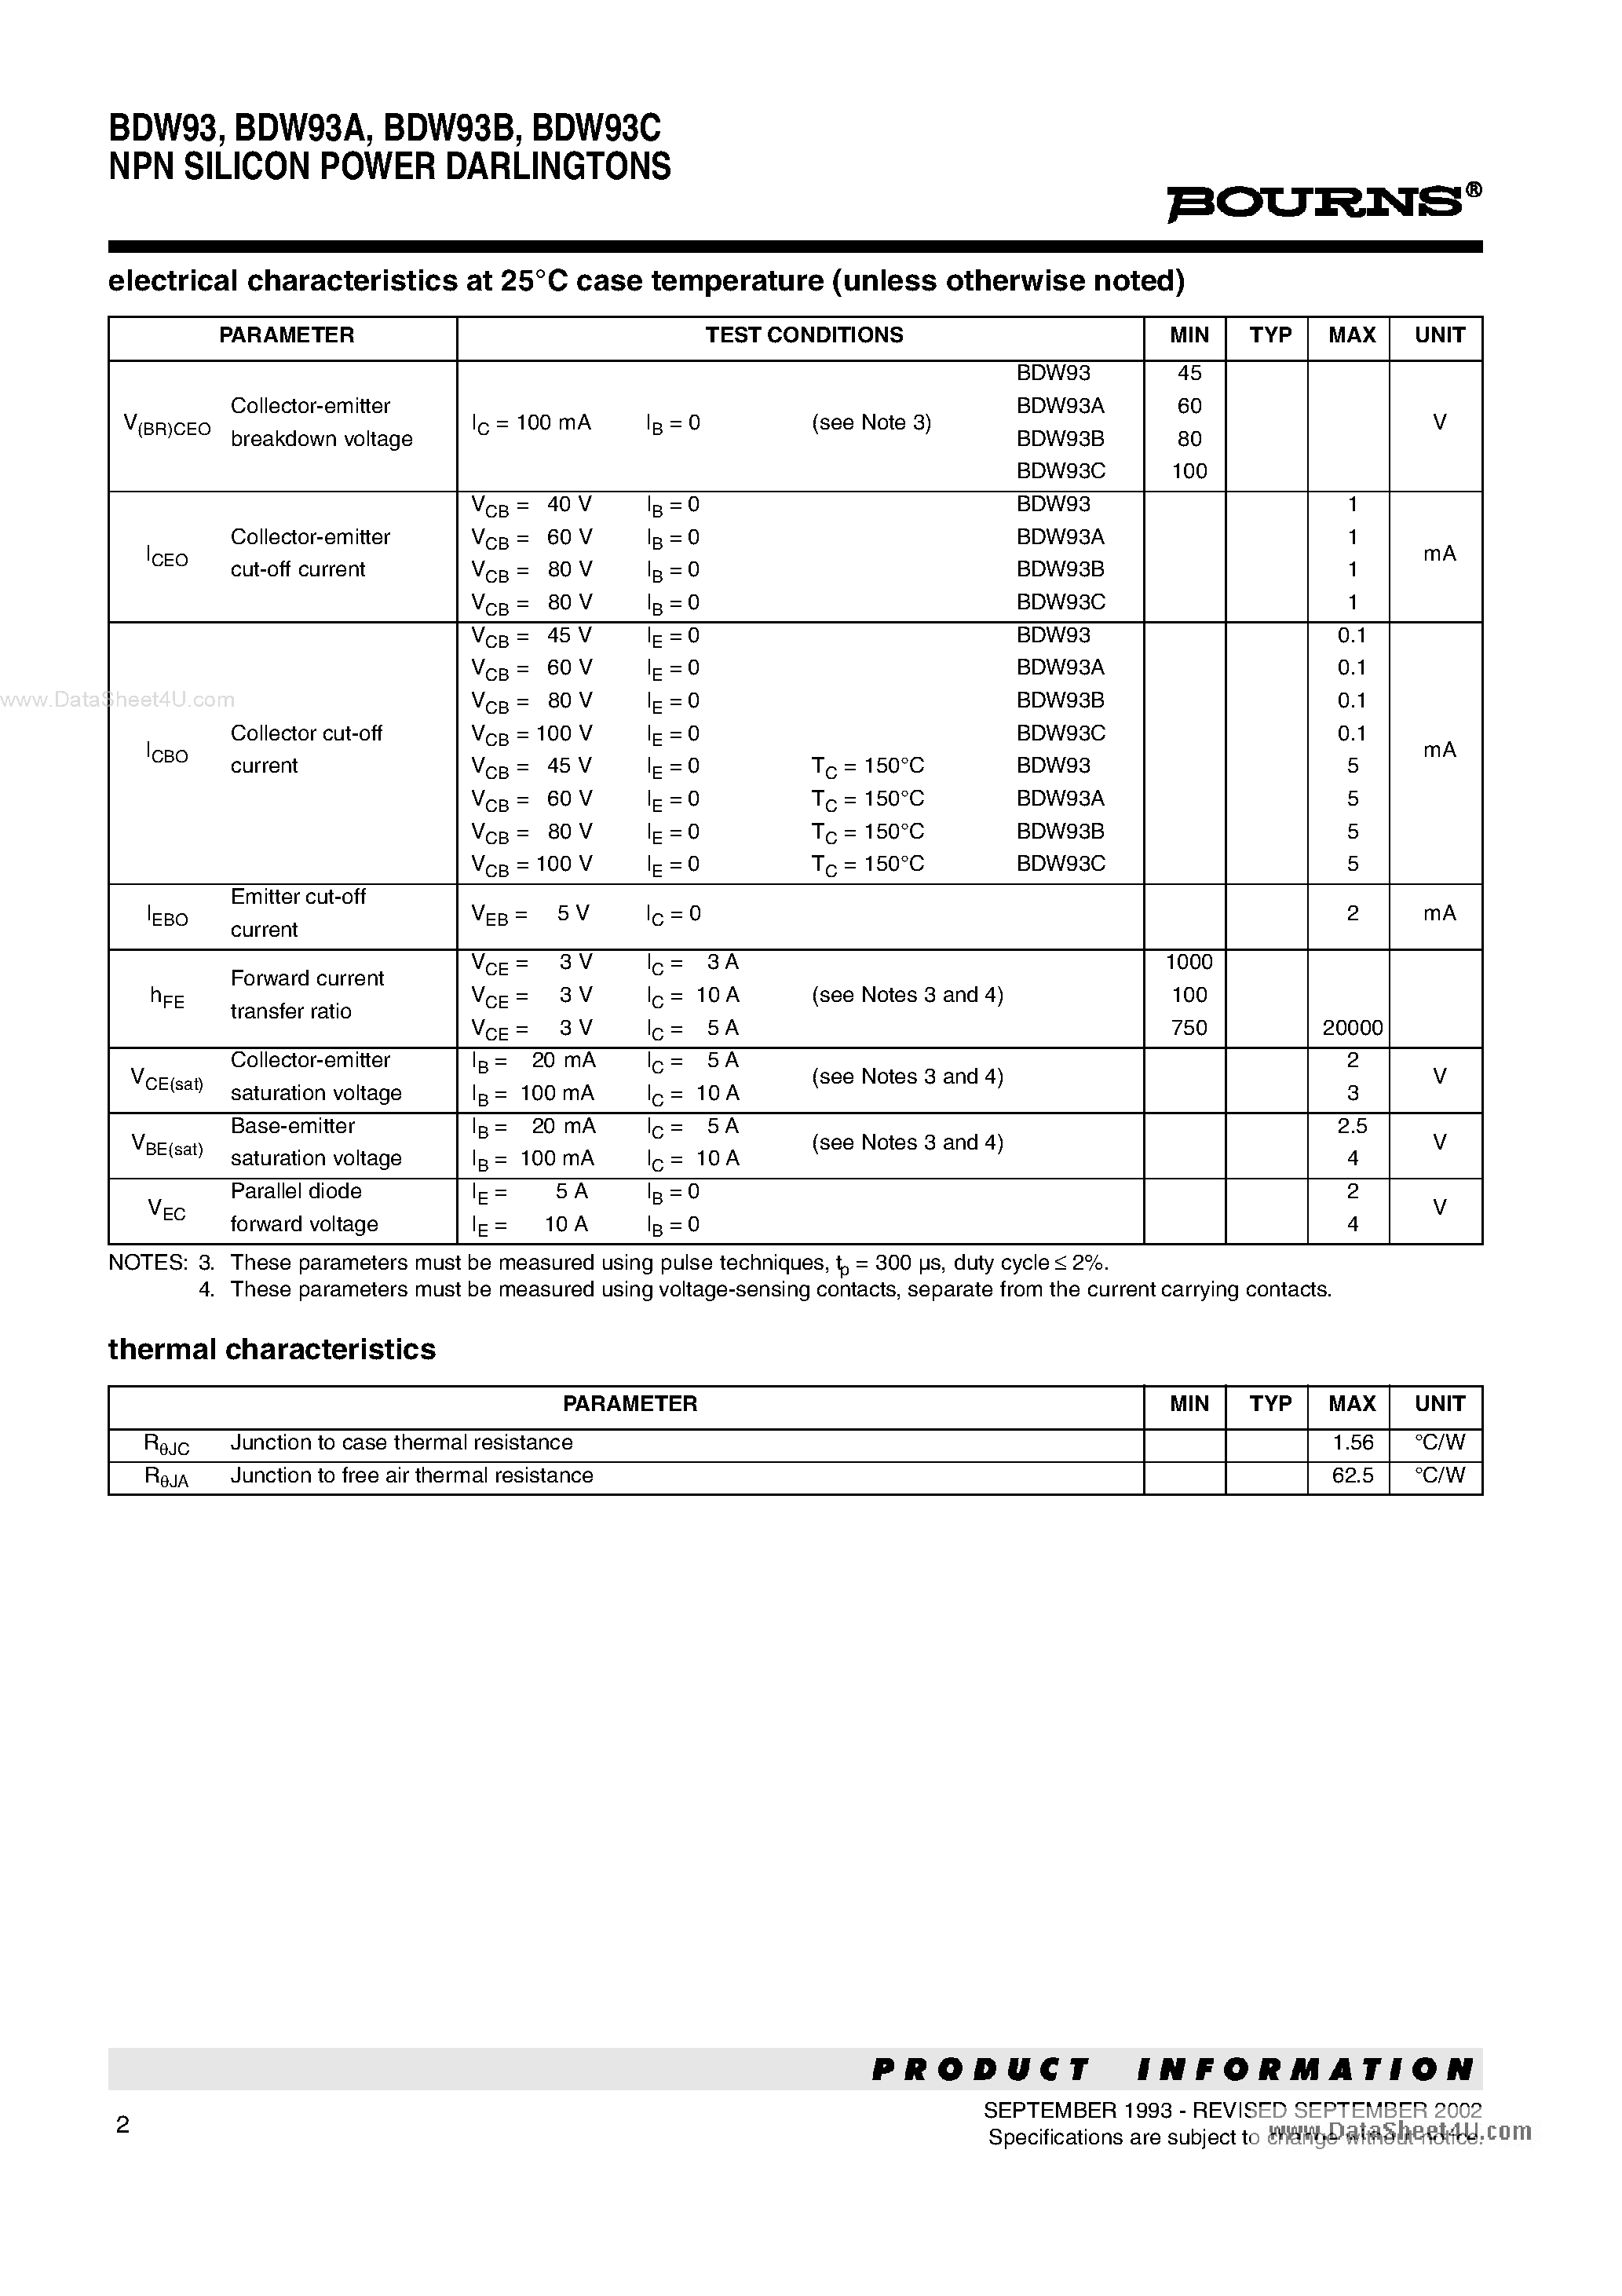 Datasheet BDW93 - NPN SILICON POWER DARLINGTONS page 2